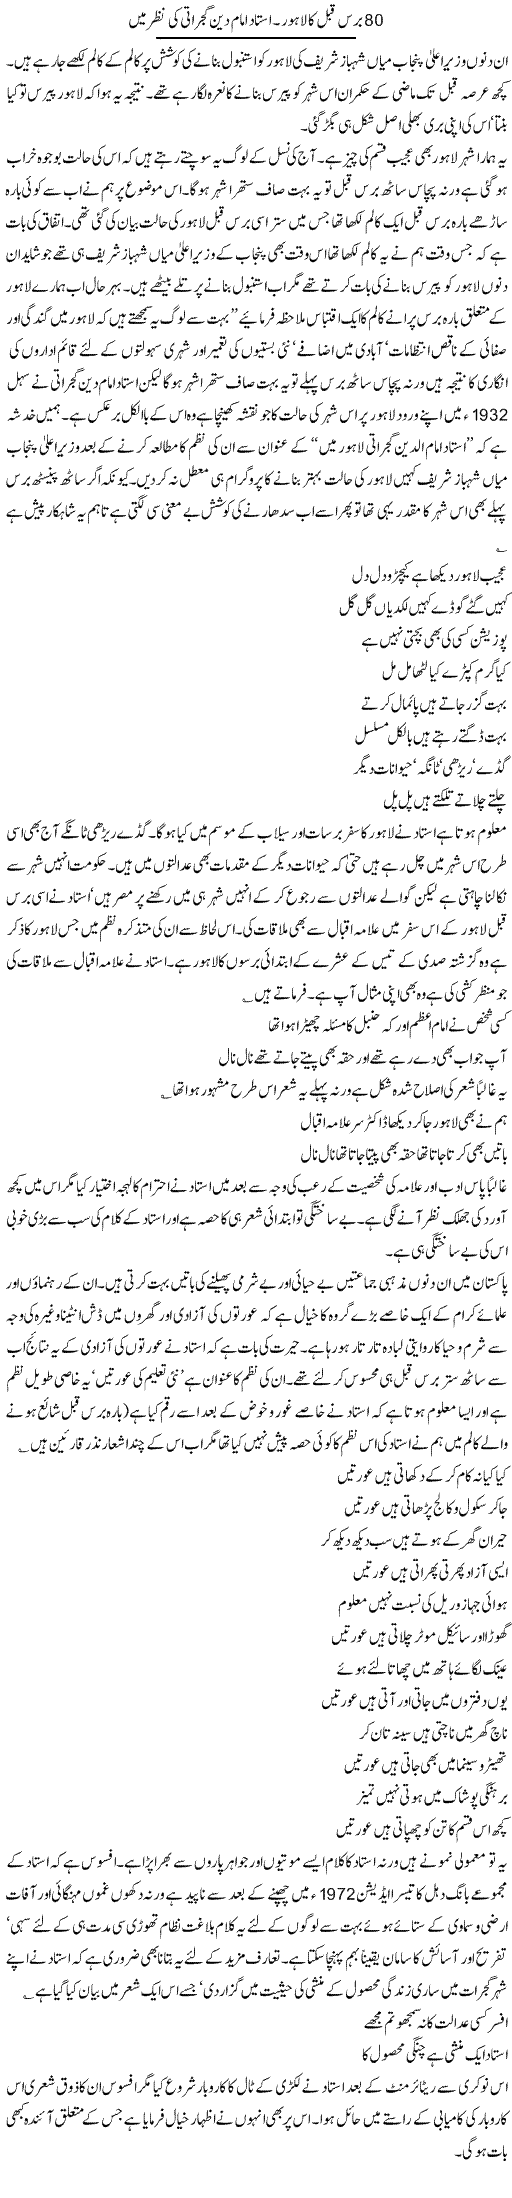 Lahore of 80 Years Back Express Column Hameed Akhtar 28 January 2011